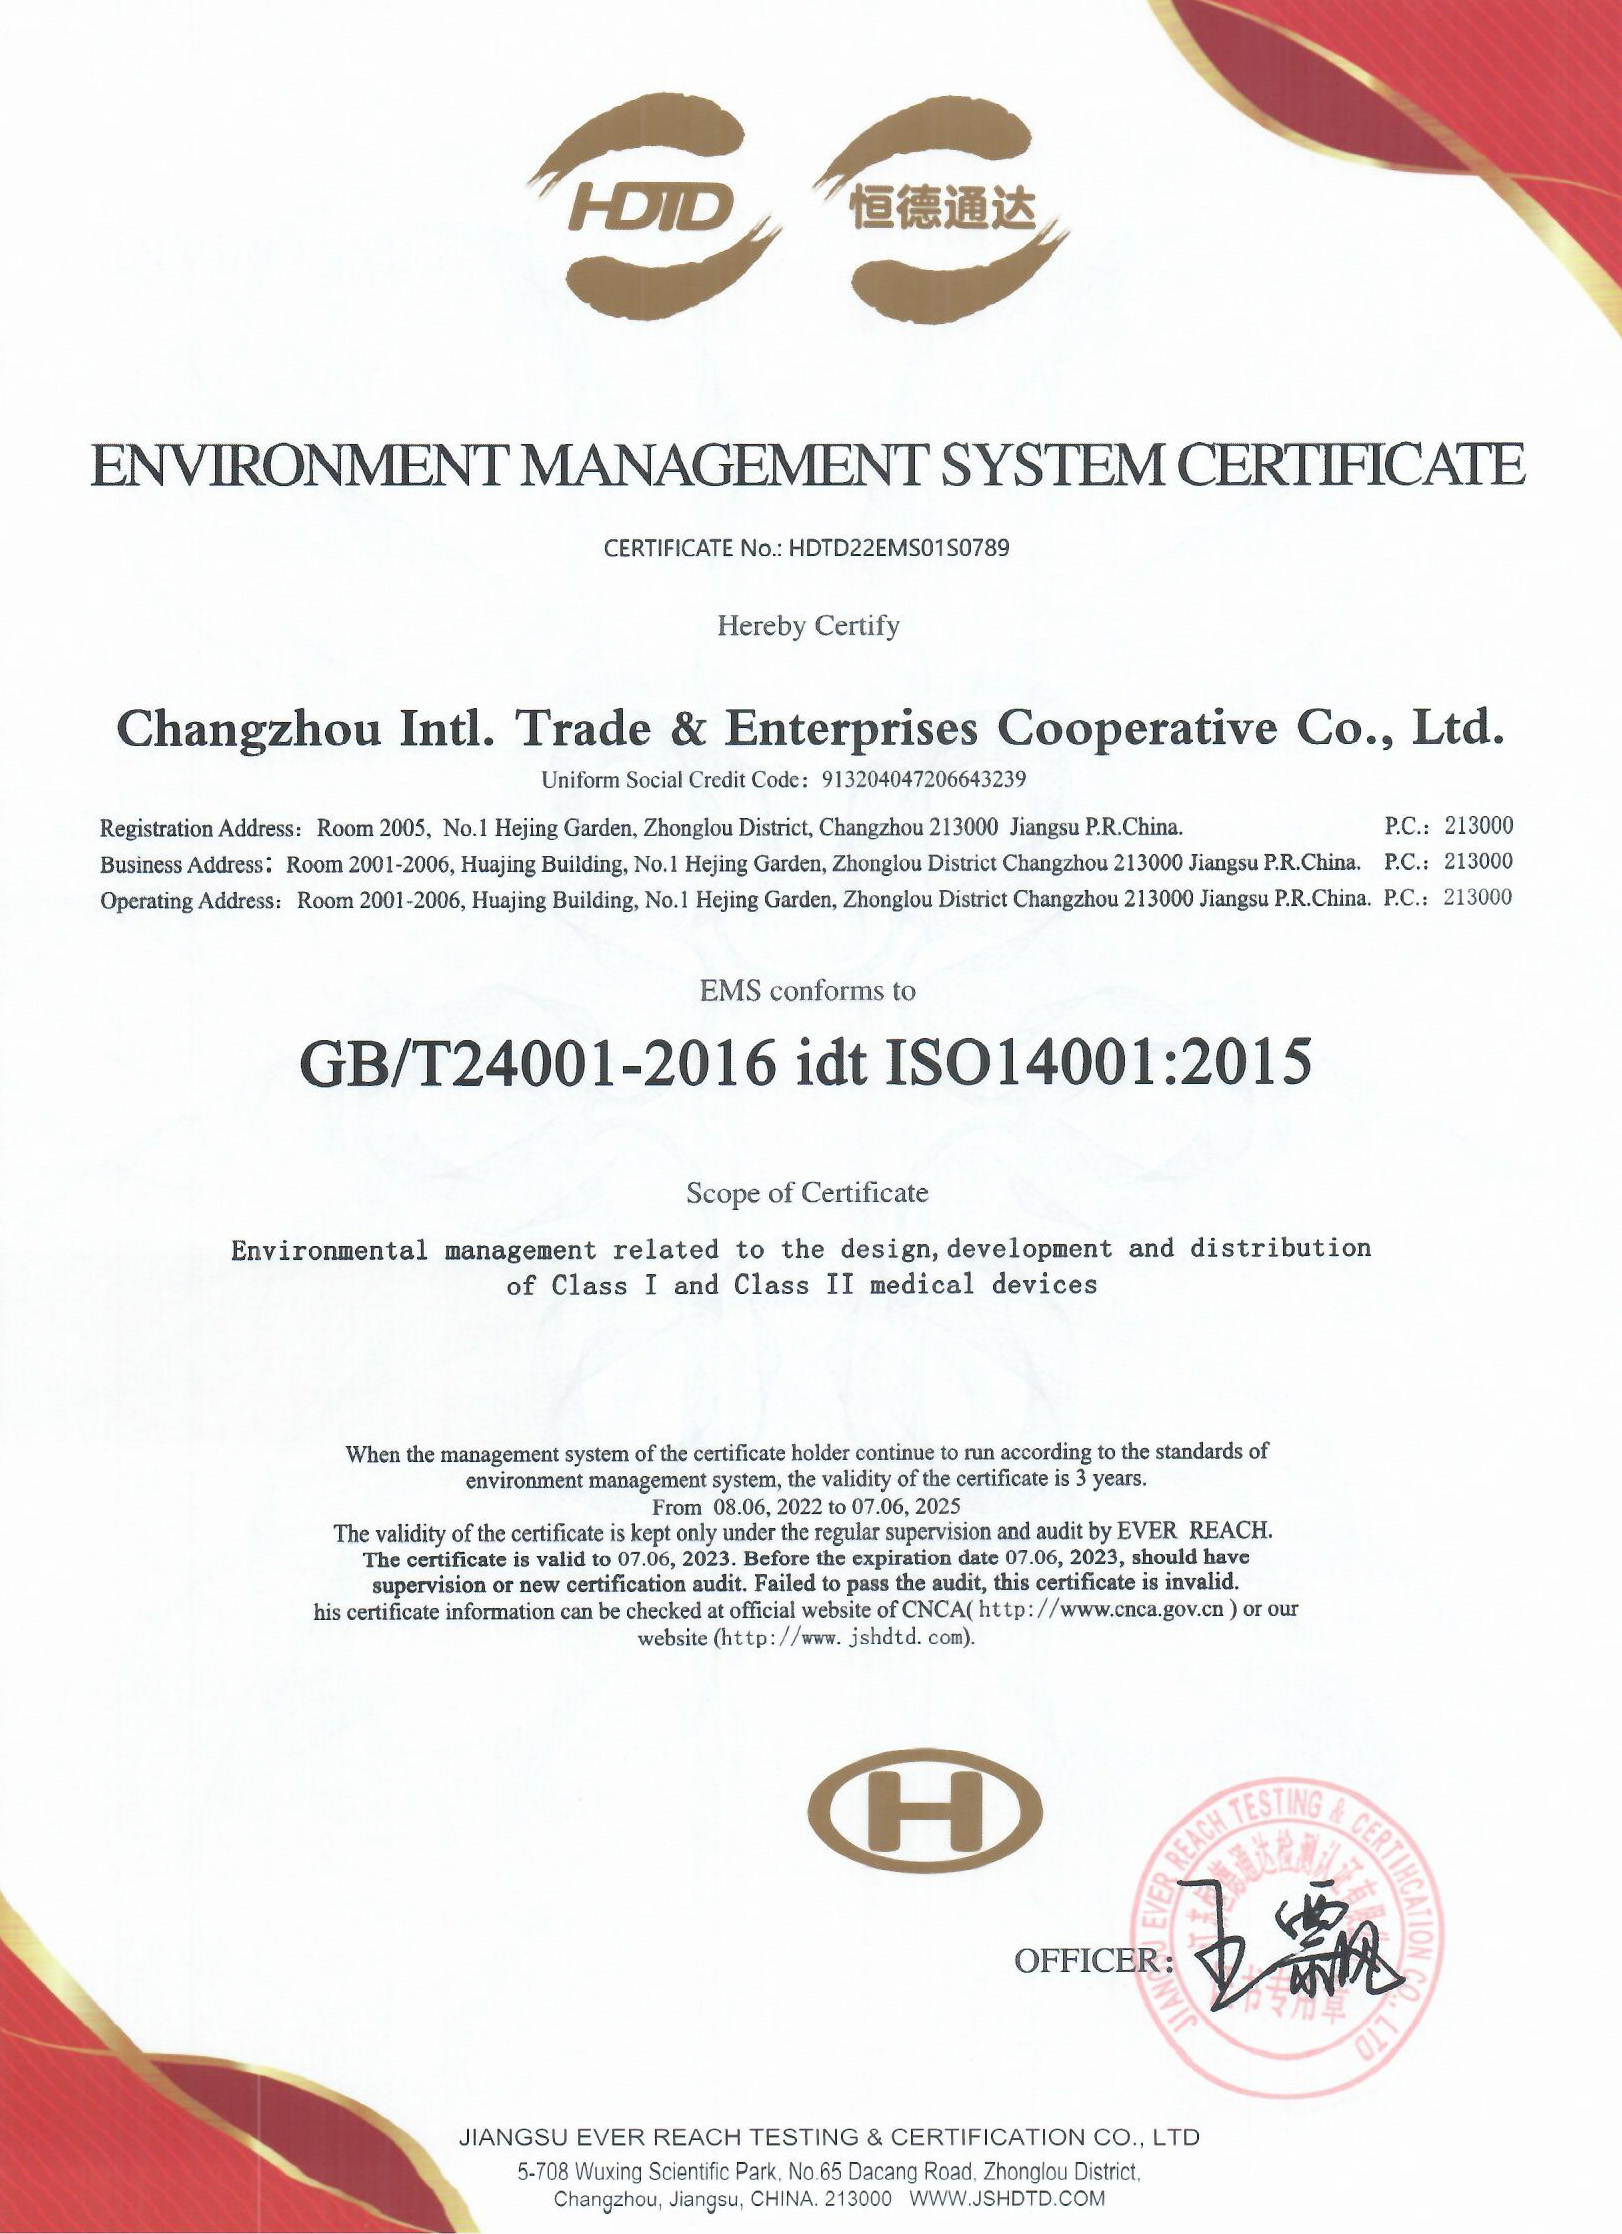  ISO14001:2015 Environmental Management System certificate